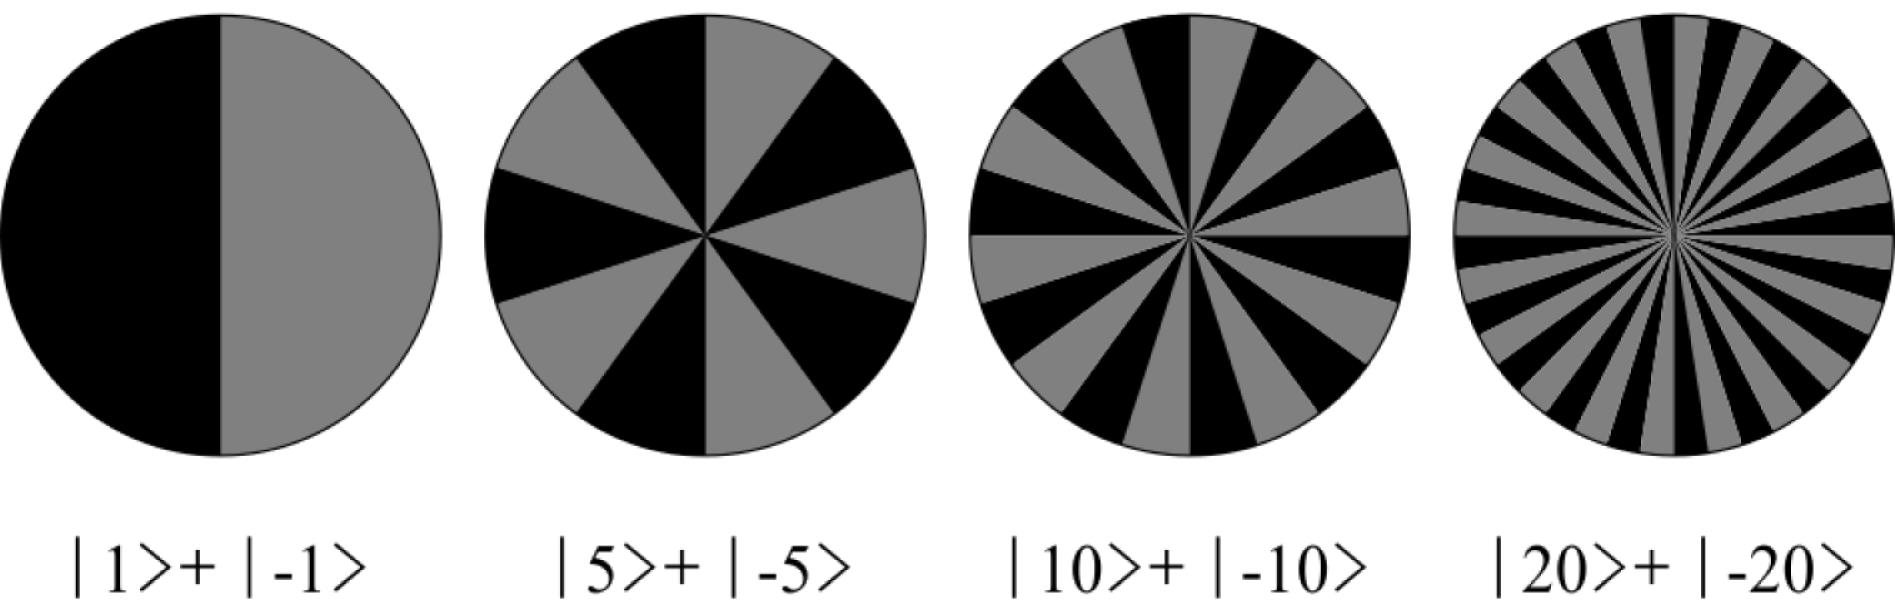 Phase patterns for the OAM superposition states. The black and gray zones indicate regions of 0 and $\unicode[STIX]{x1D70B}$ phase imprints, respectively.